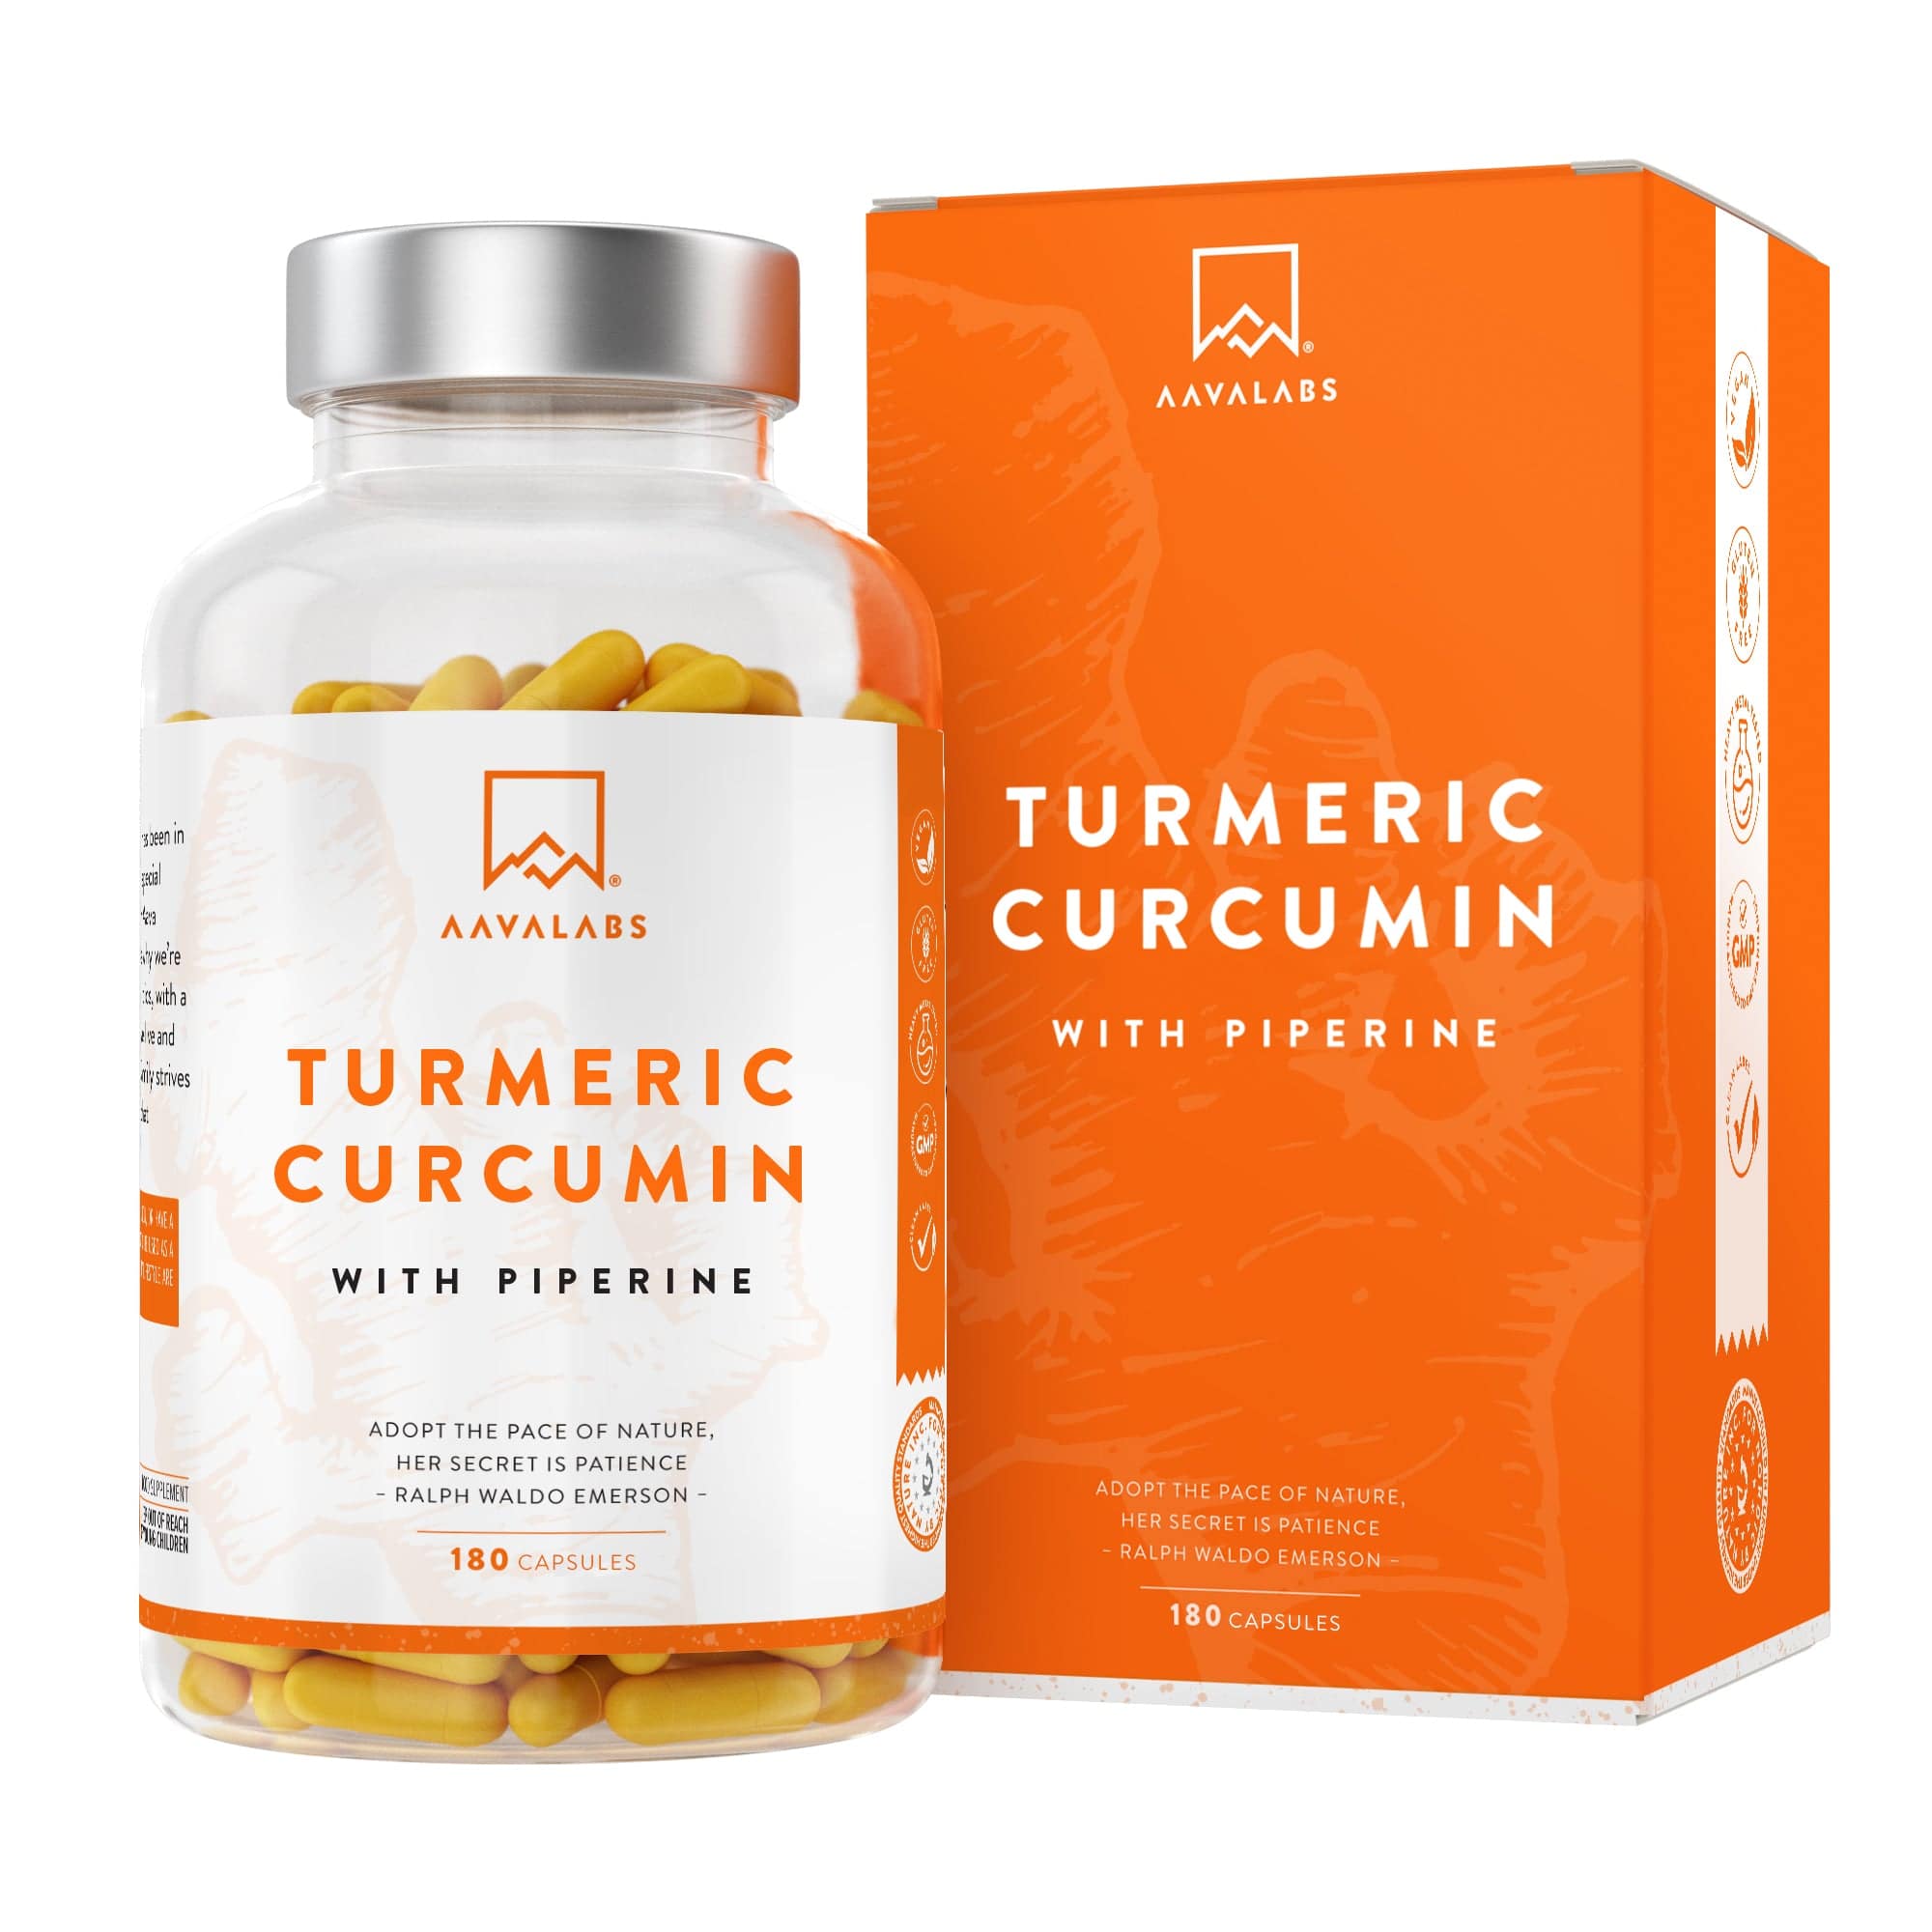 Curcumin Turmeric Complex with Piperine bottle and box, 180 capsules - AAVALABS